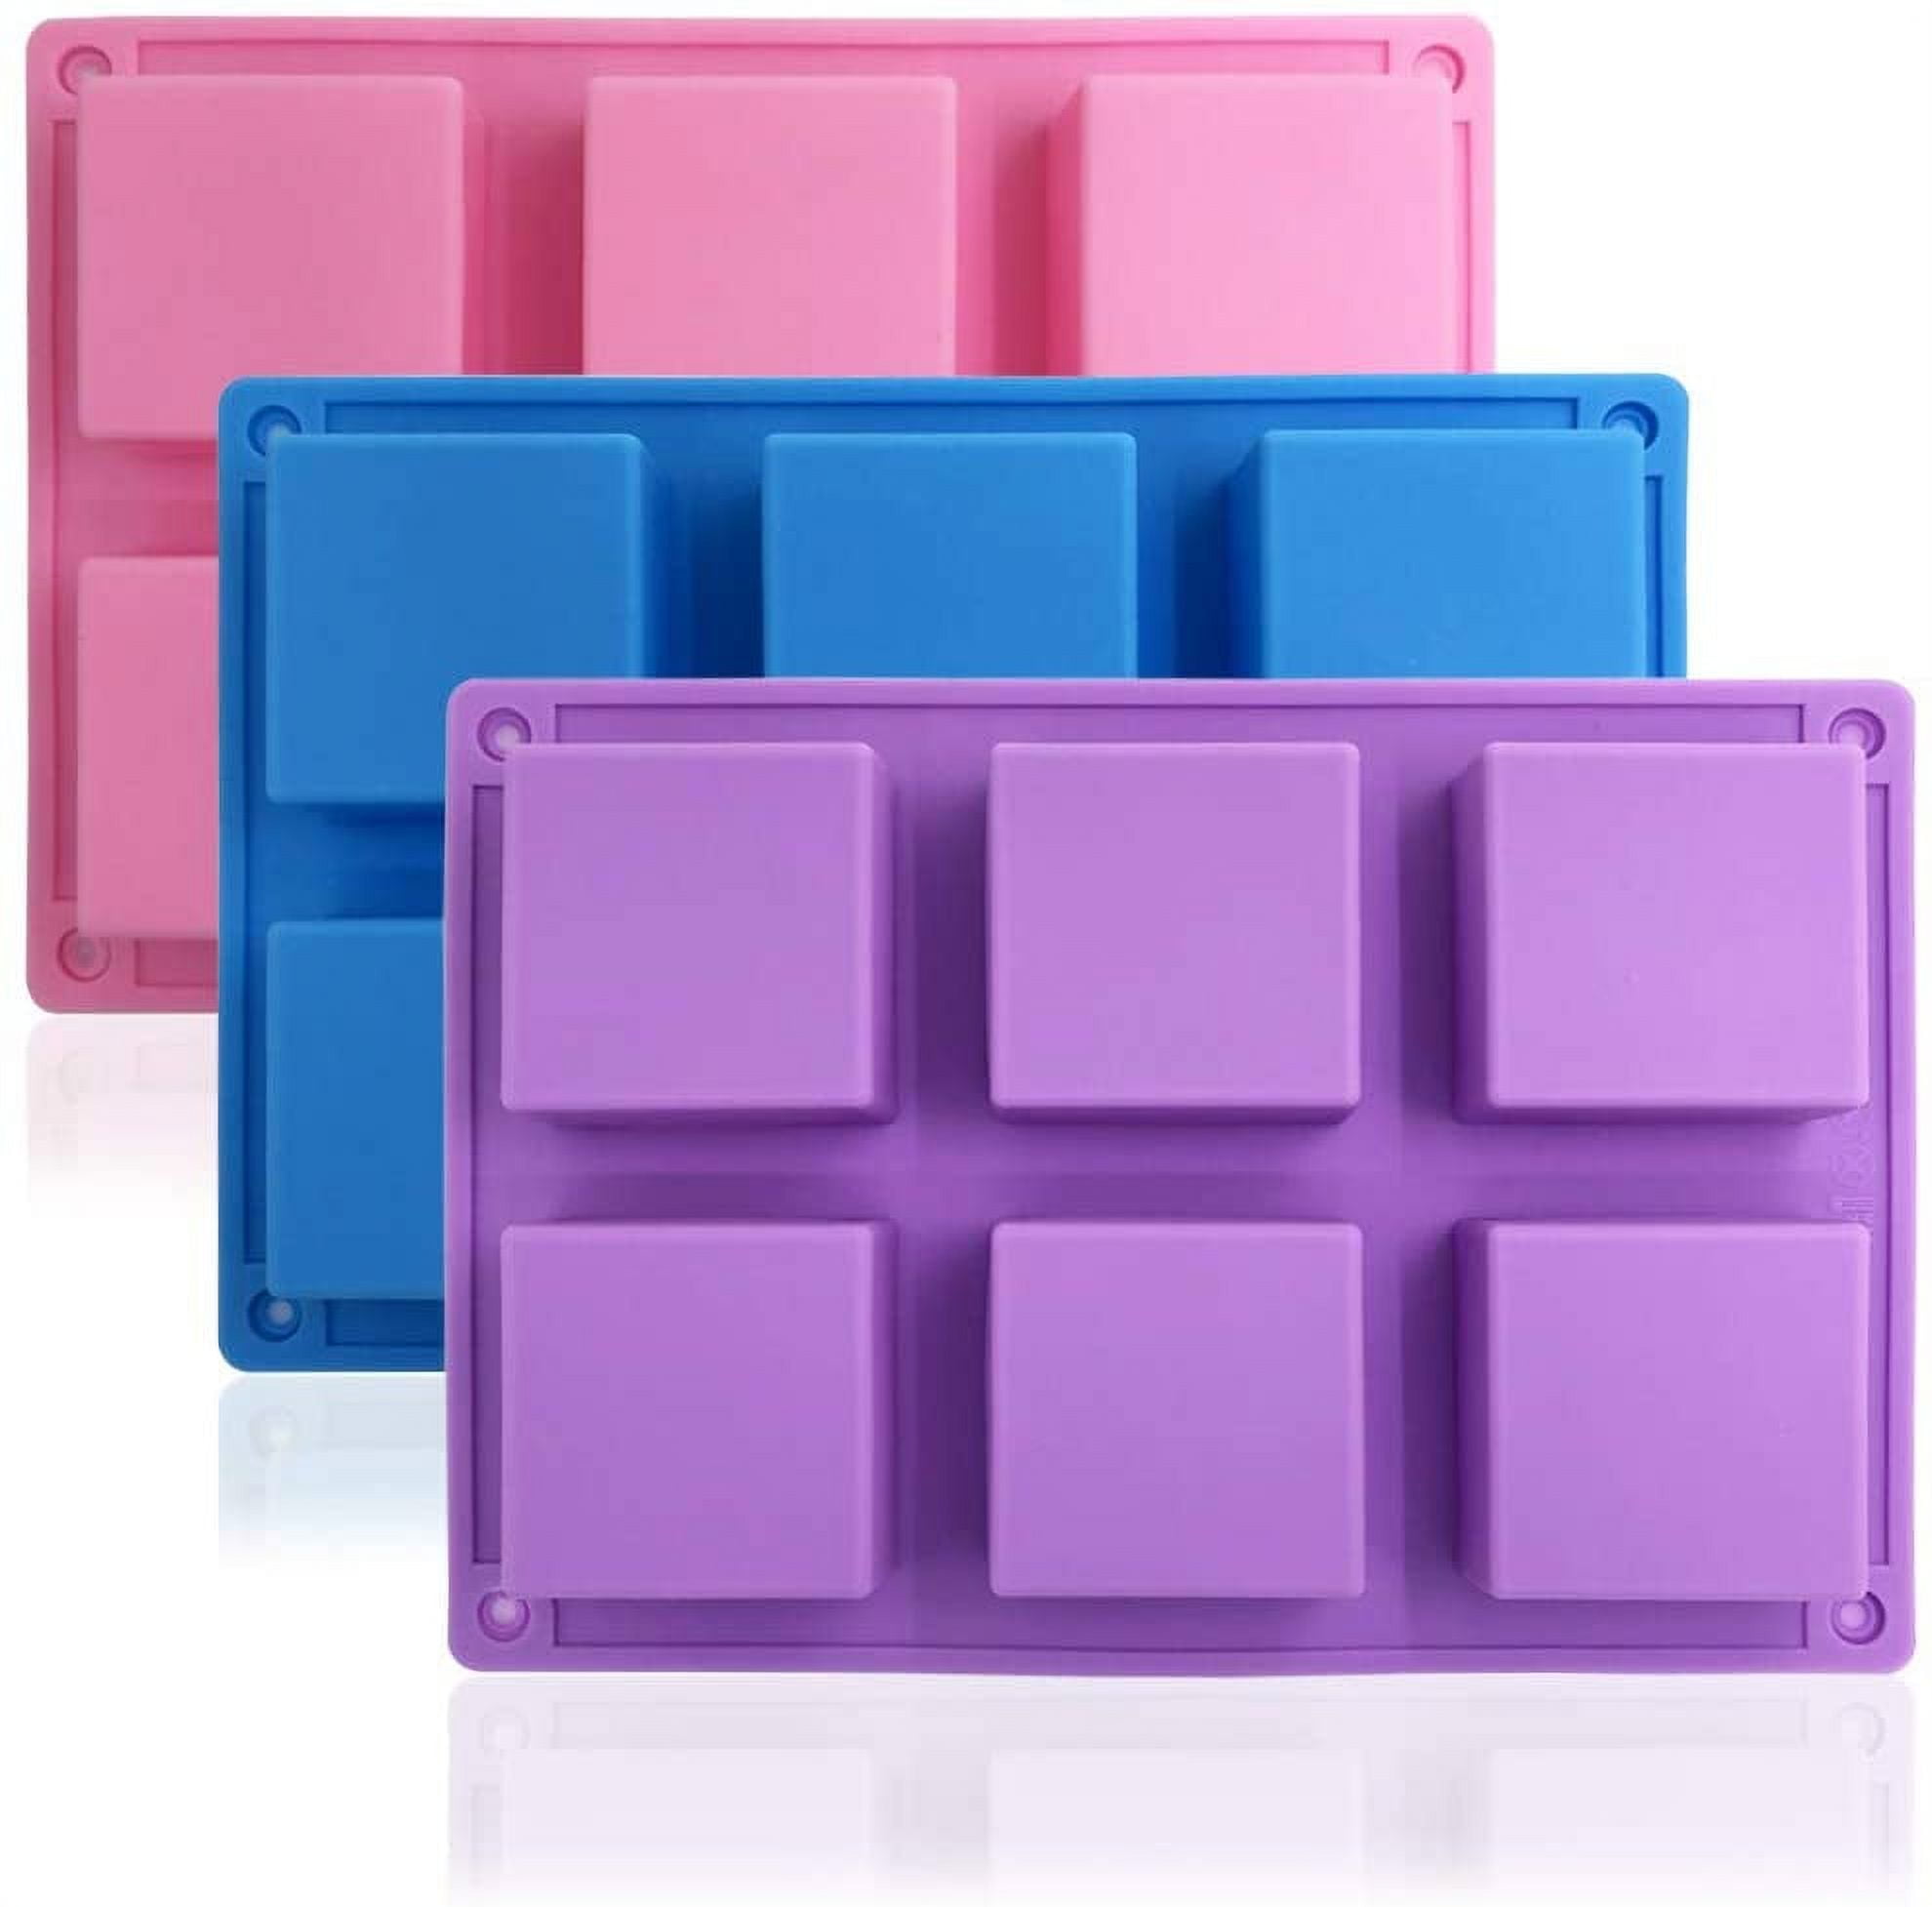 Peak XL Ice Cube Tray - Speckled Pink